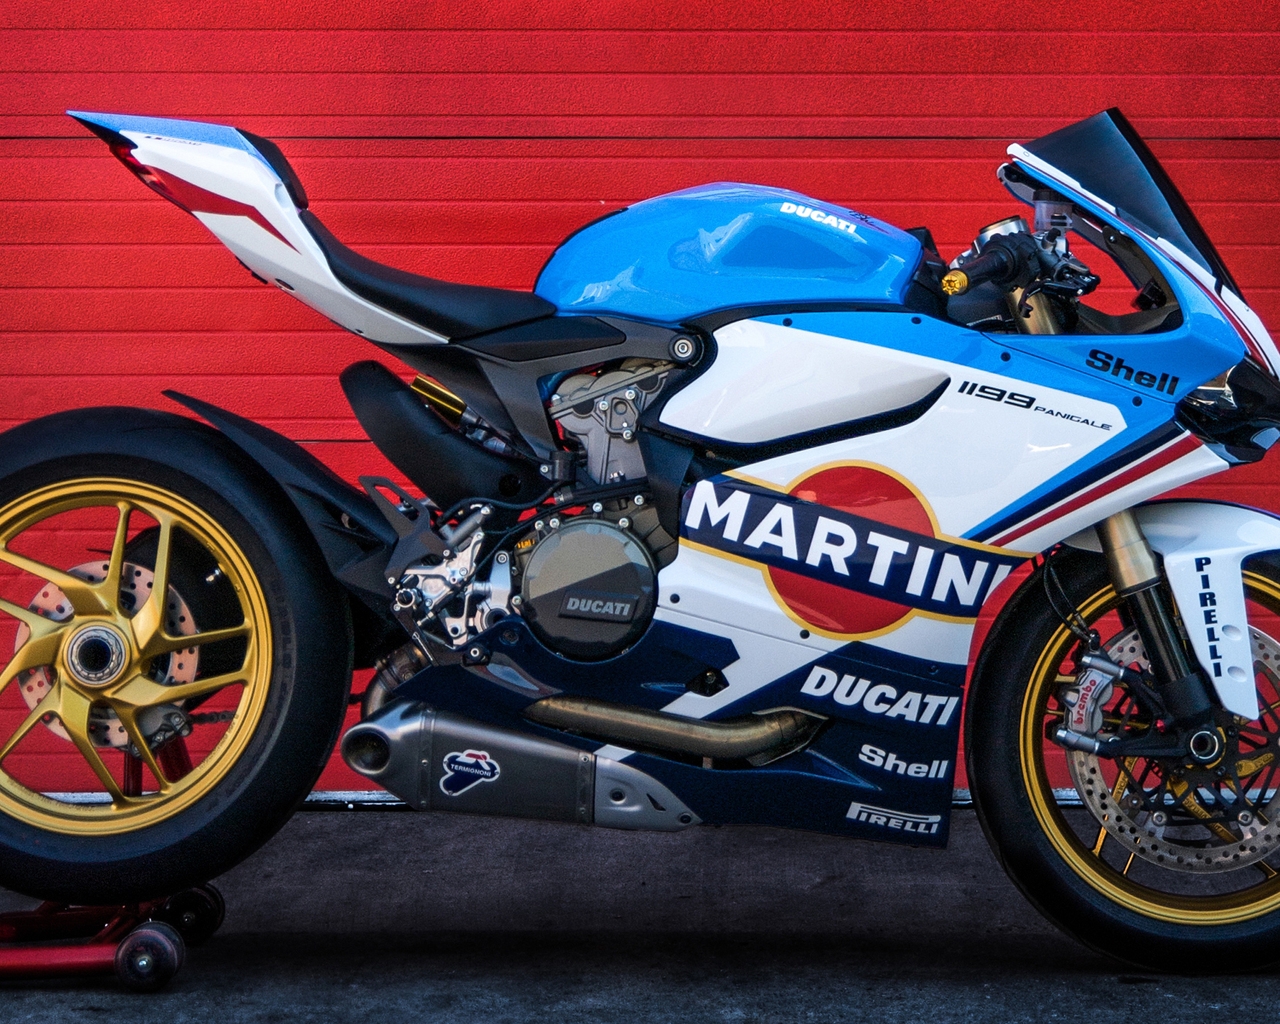 Ducati superbike 1199 Panigale for 1280 x 1024 resolution